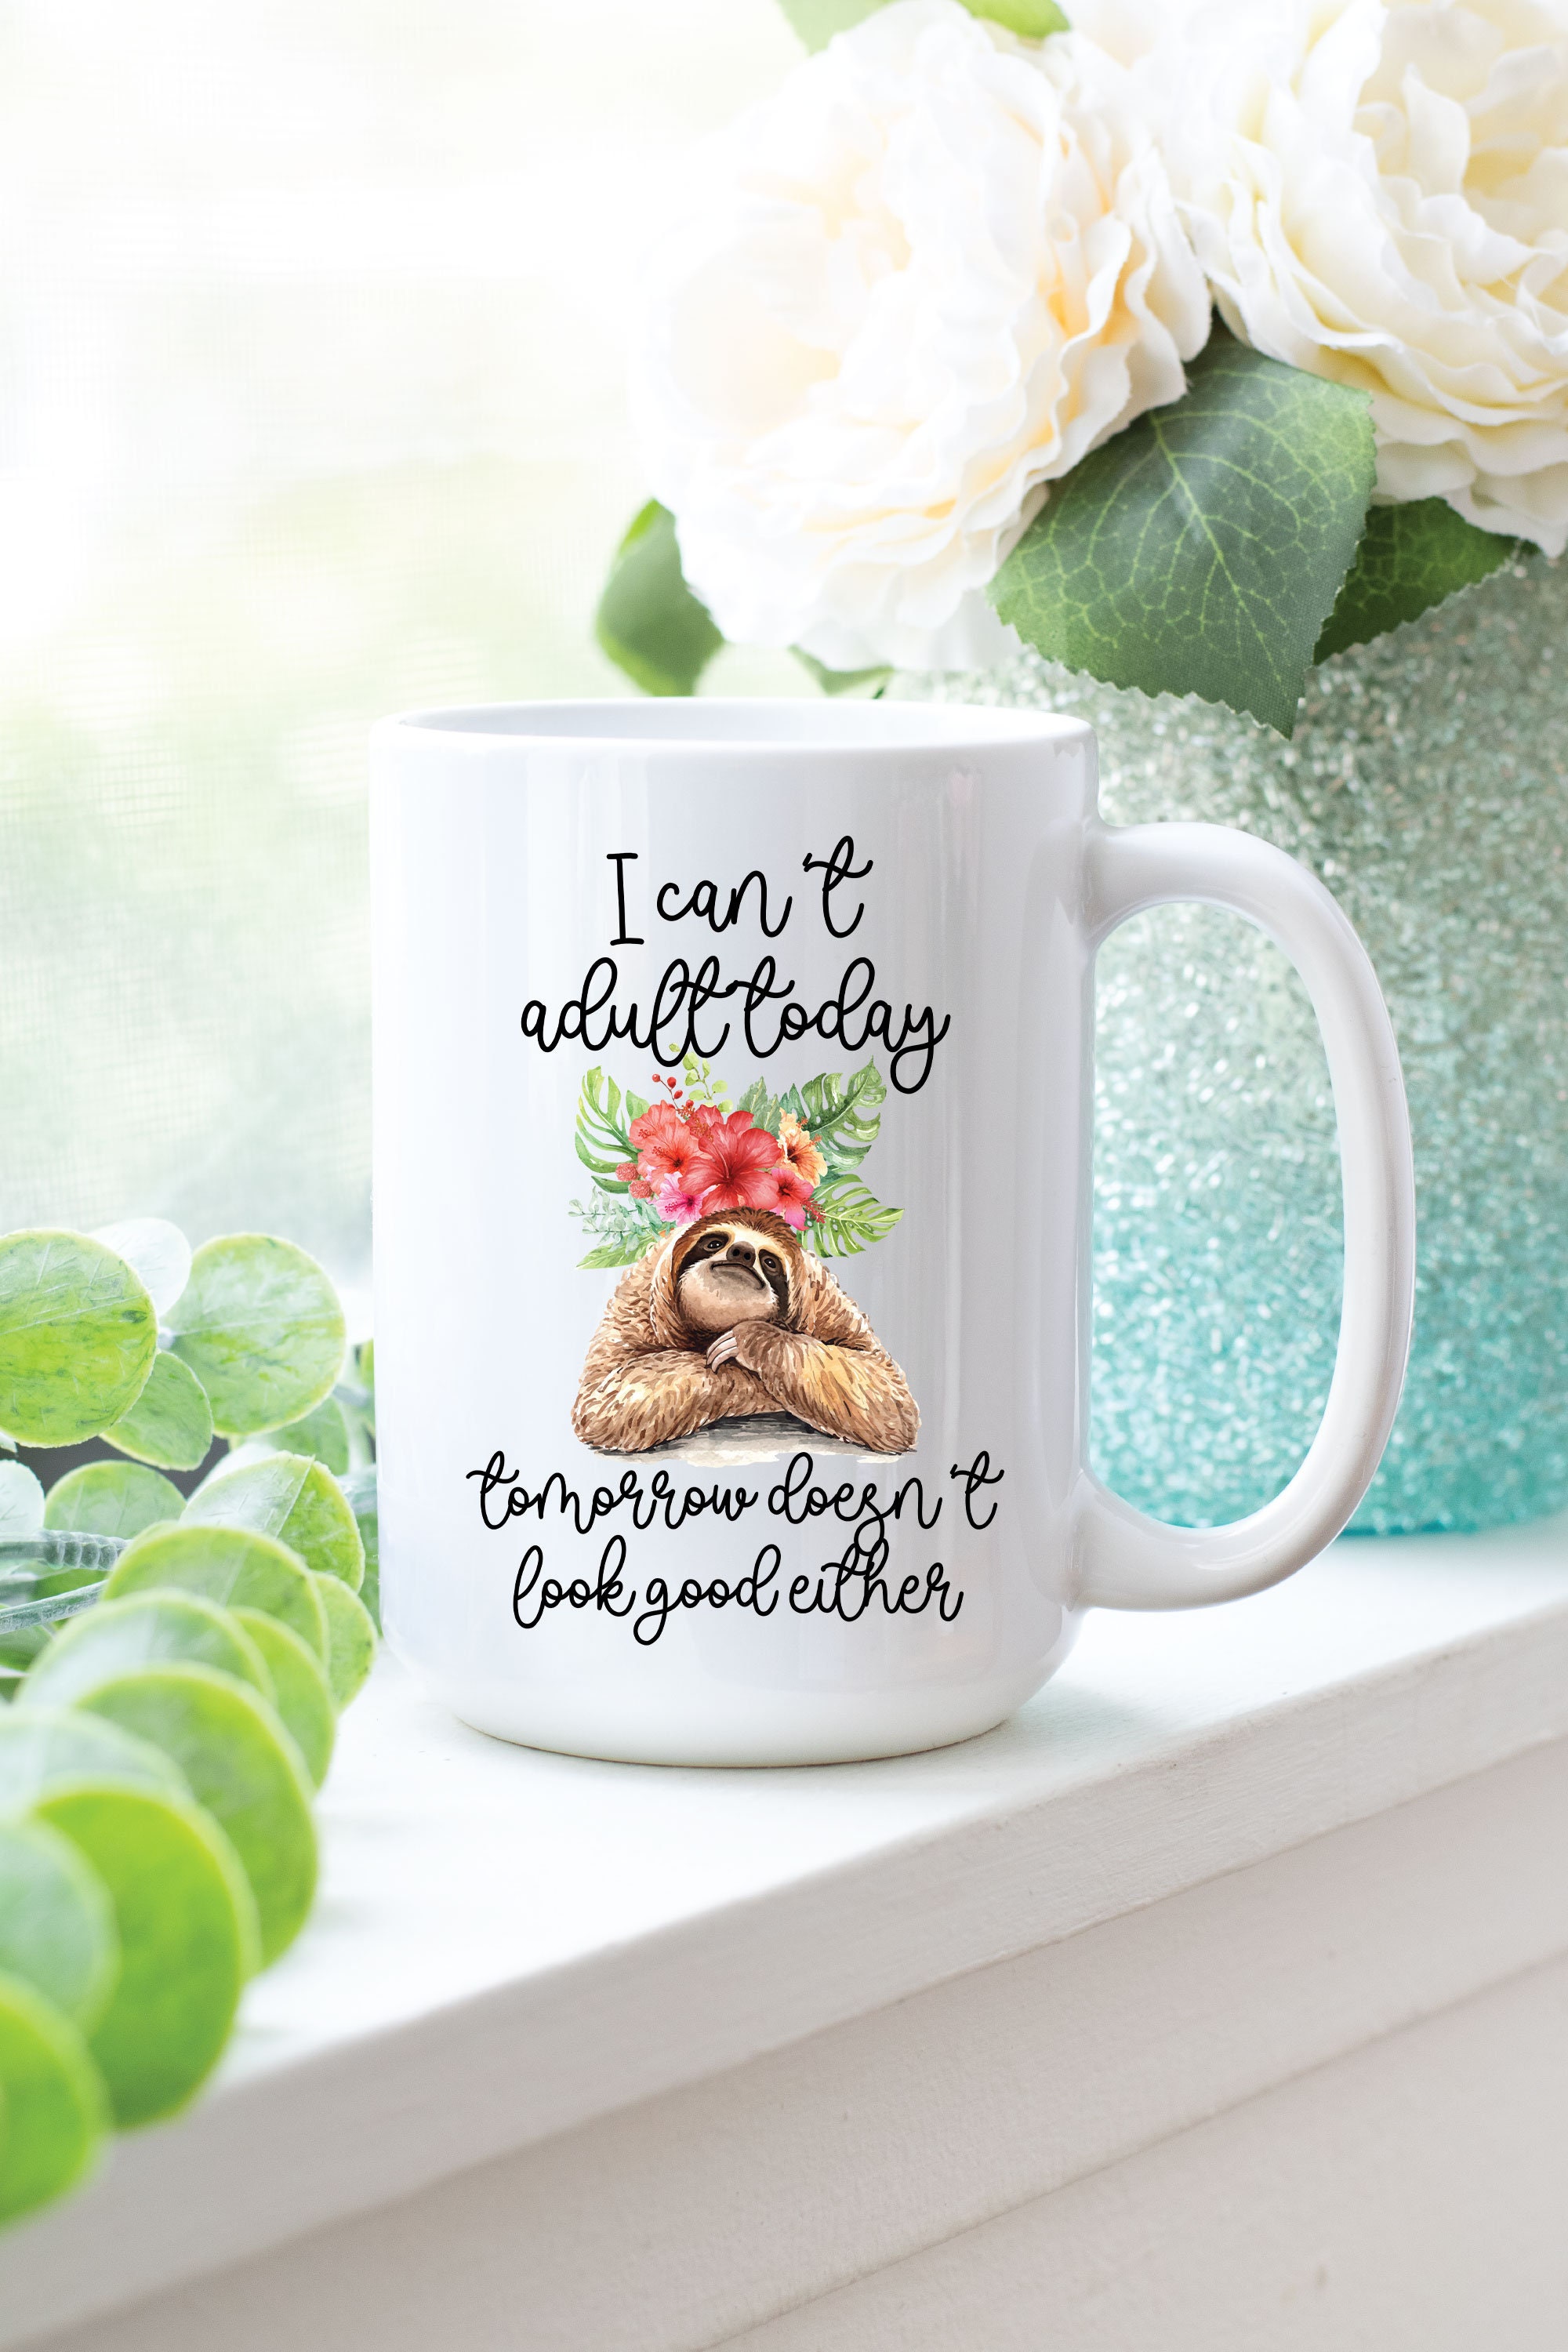 I Can't Adult Today – Engraved Tumbler, Funny Adult Humor Gift, Adulting  Travel Mug – 3C Etching LTD